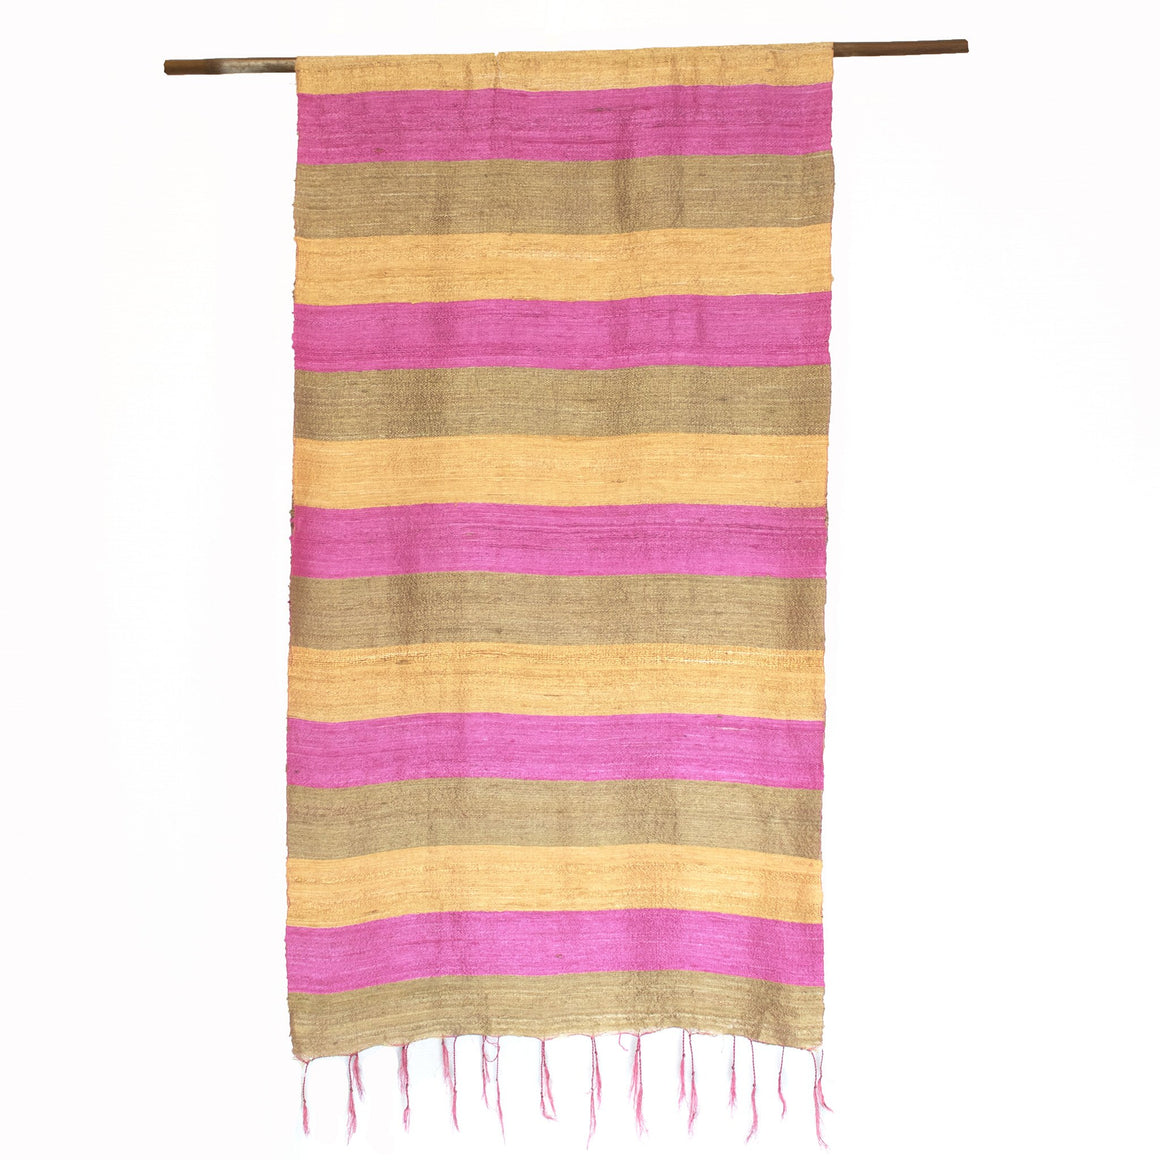 SALMON GOLD TAN HAND WOVEN 100% RAW SILK THAI SCARF SCARVES ZENZOEY JEWELRY & ACCESSORIES 